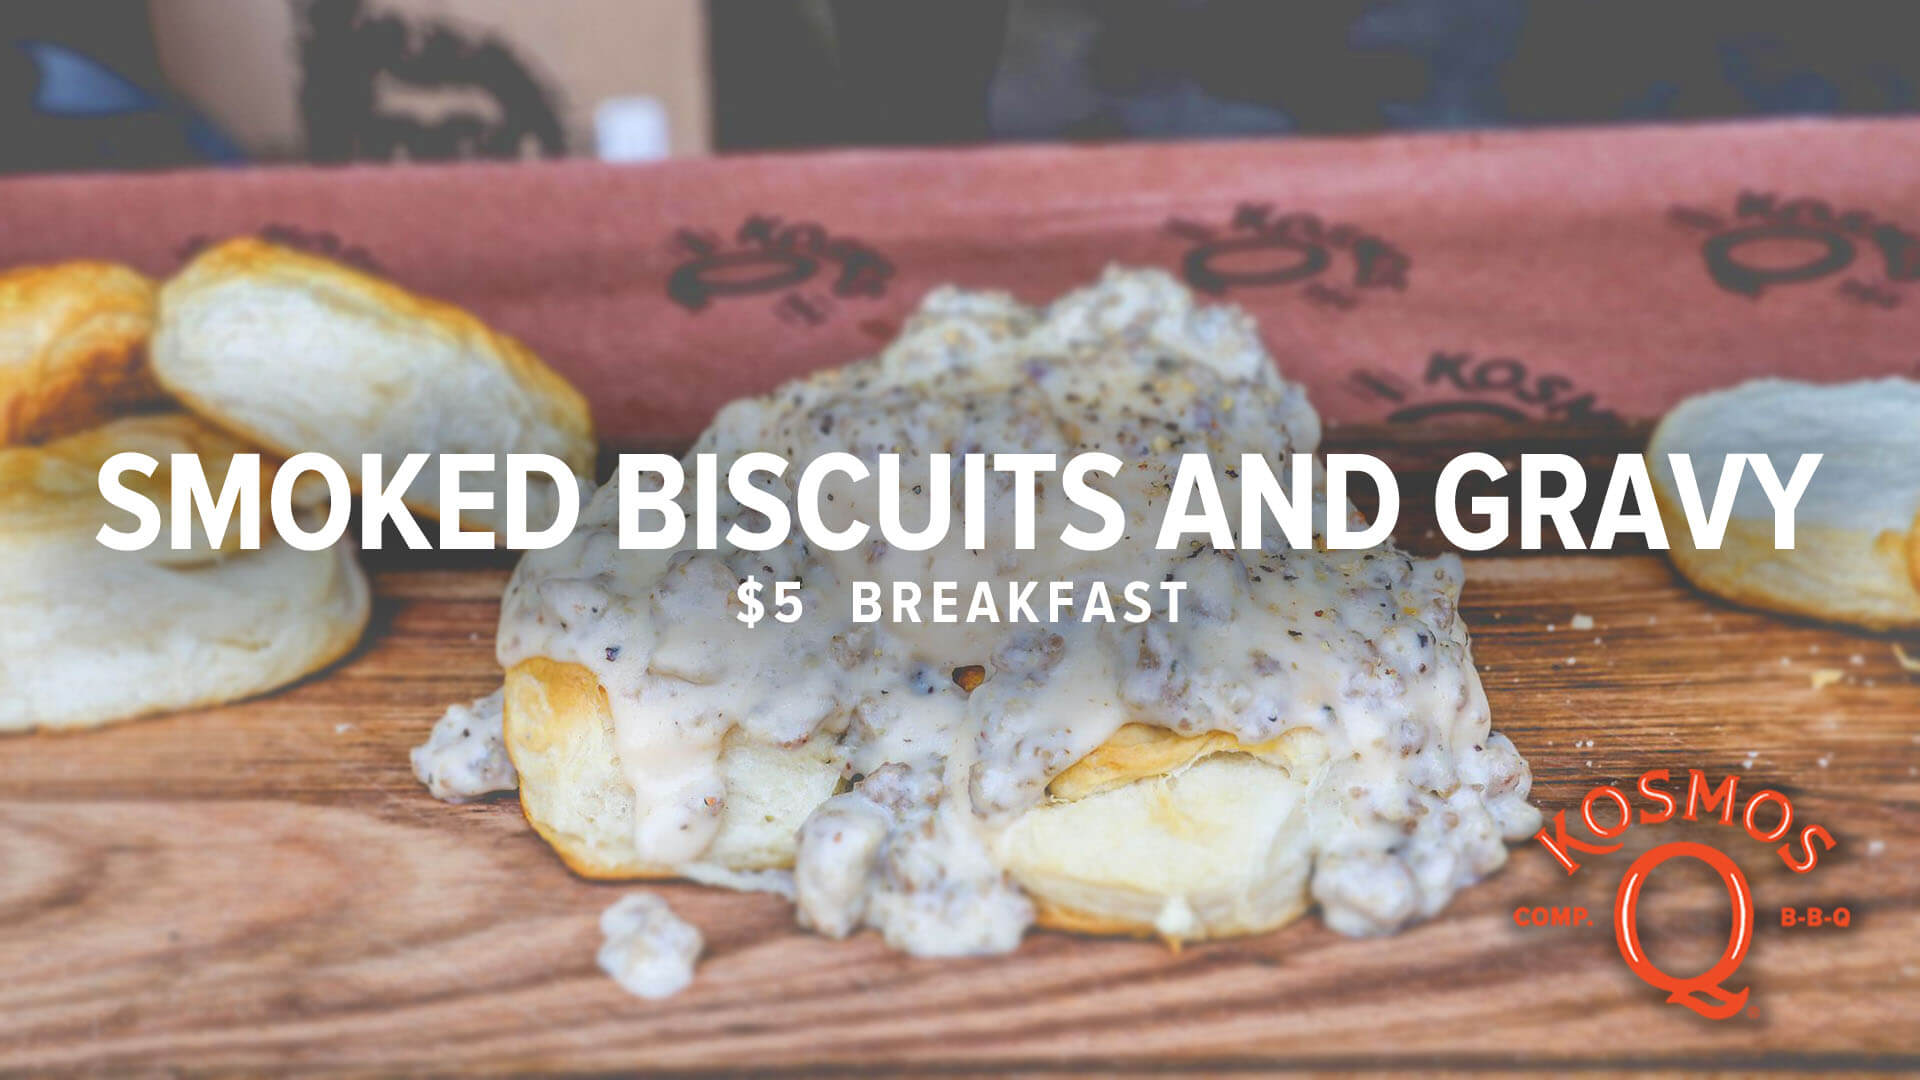 Sausage Egg and Cheese Biscuits  $5 Breakfast Recipe - Kosmos Q BBQ  Products & Supplies